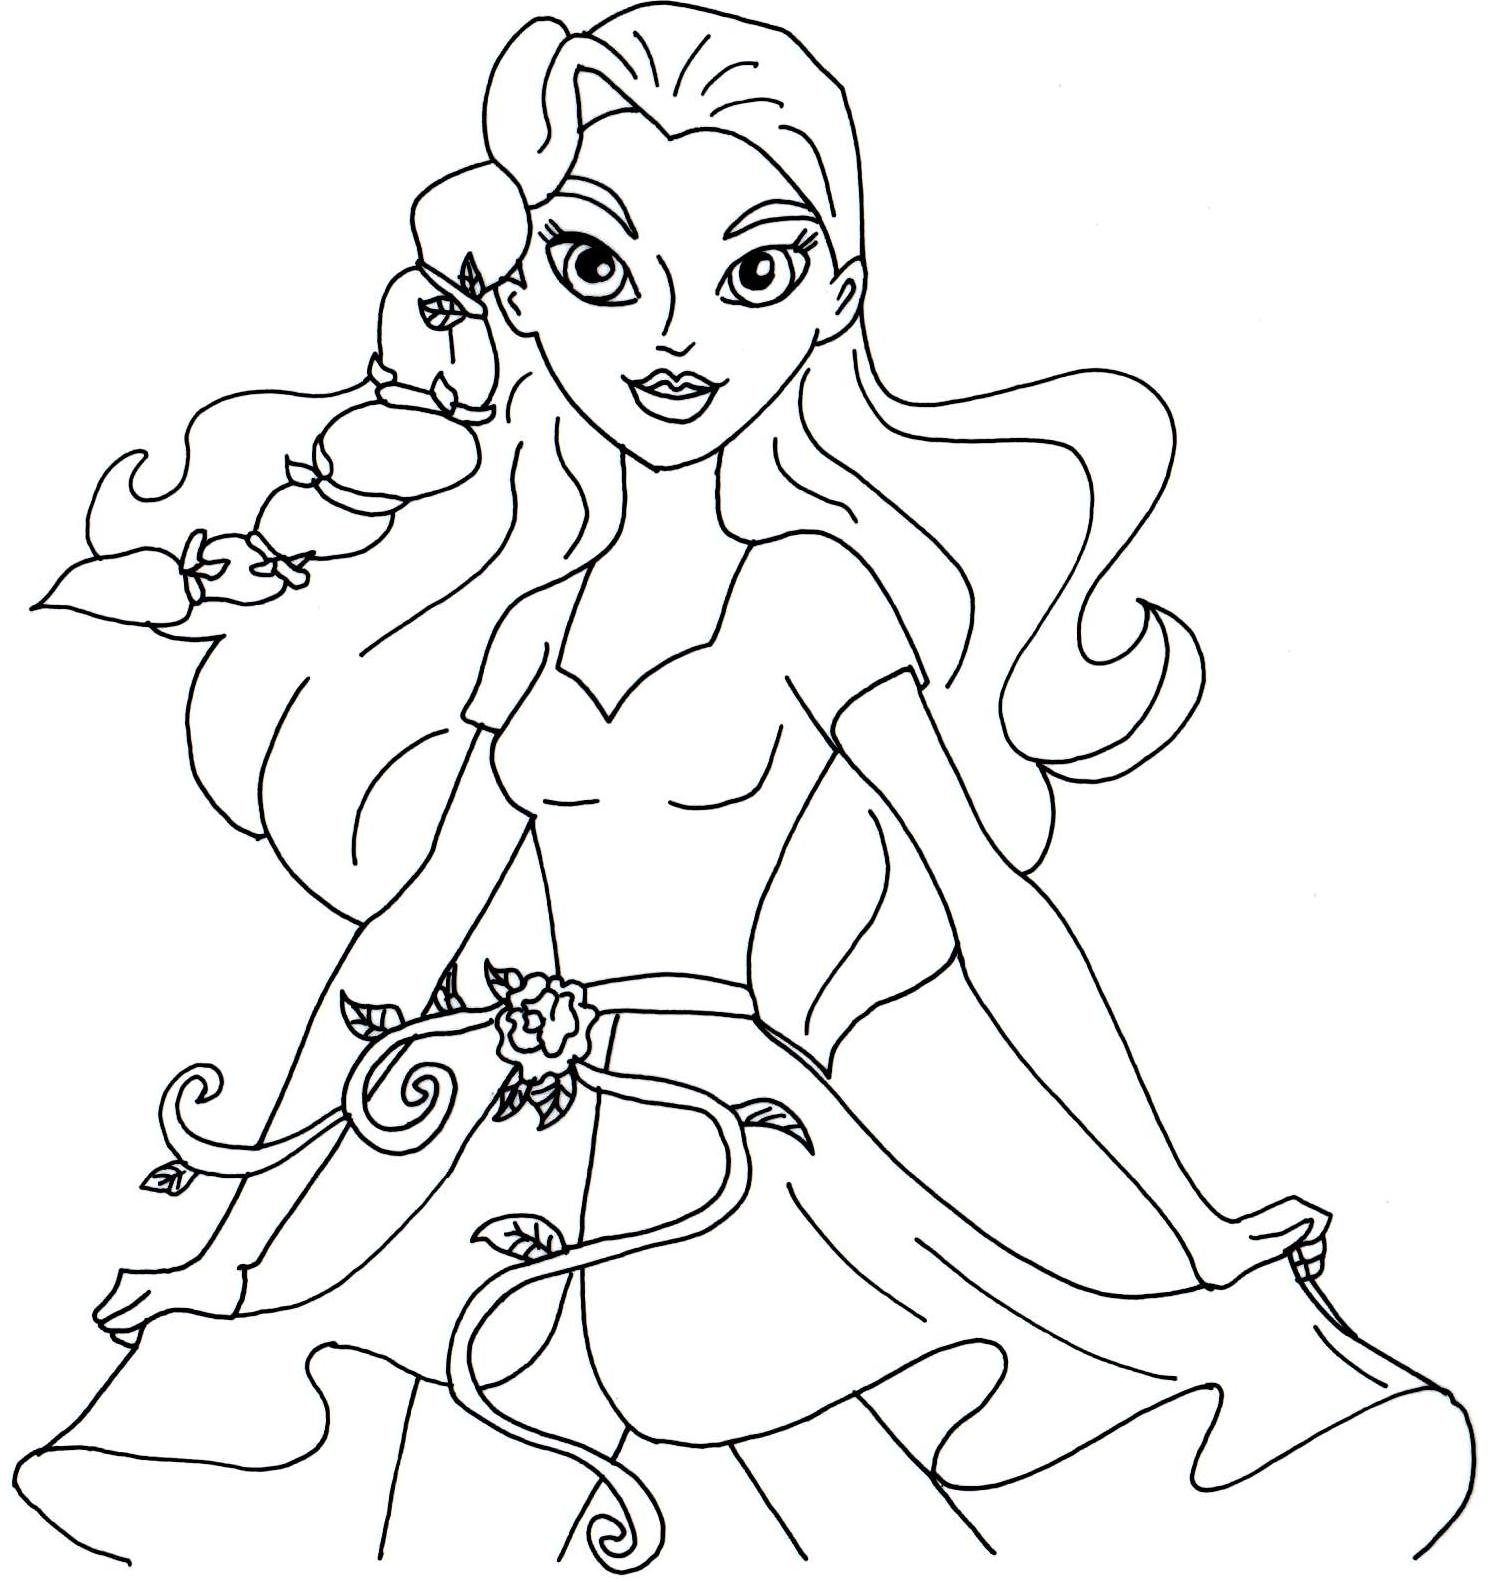 Dc Superhero Girl Coloring Pages At Getcolorings Free Printable Colorings Pages To Print